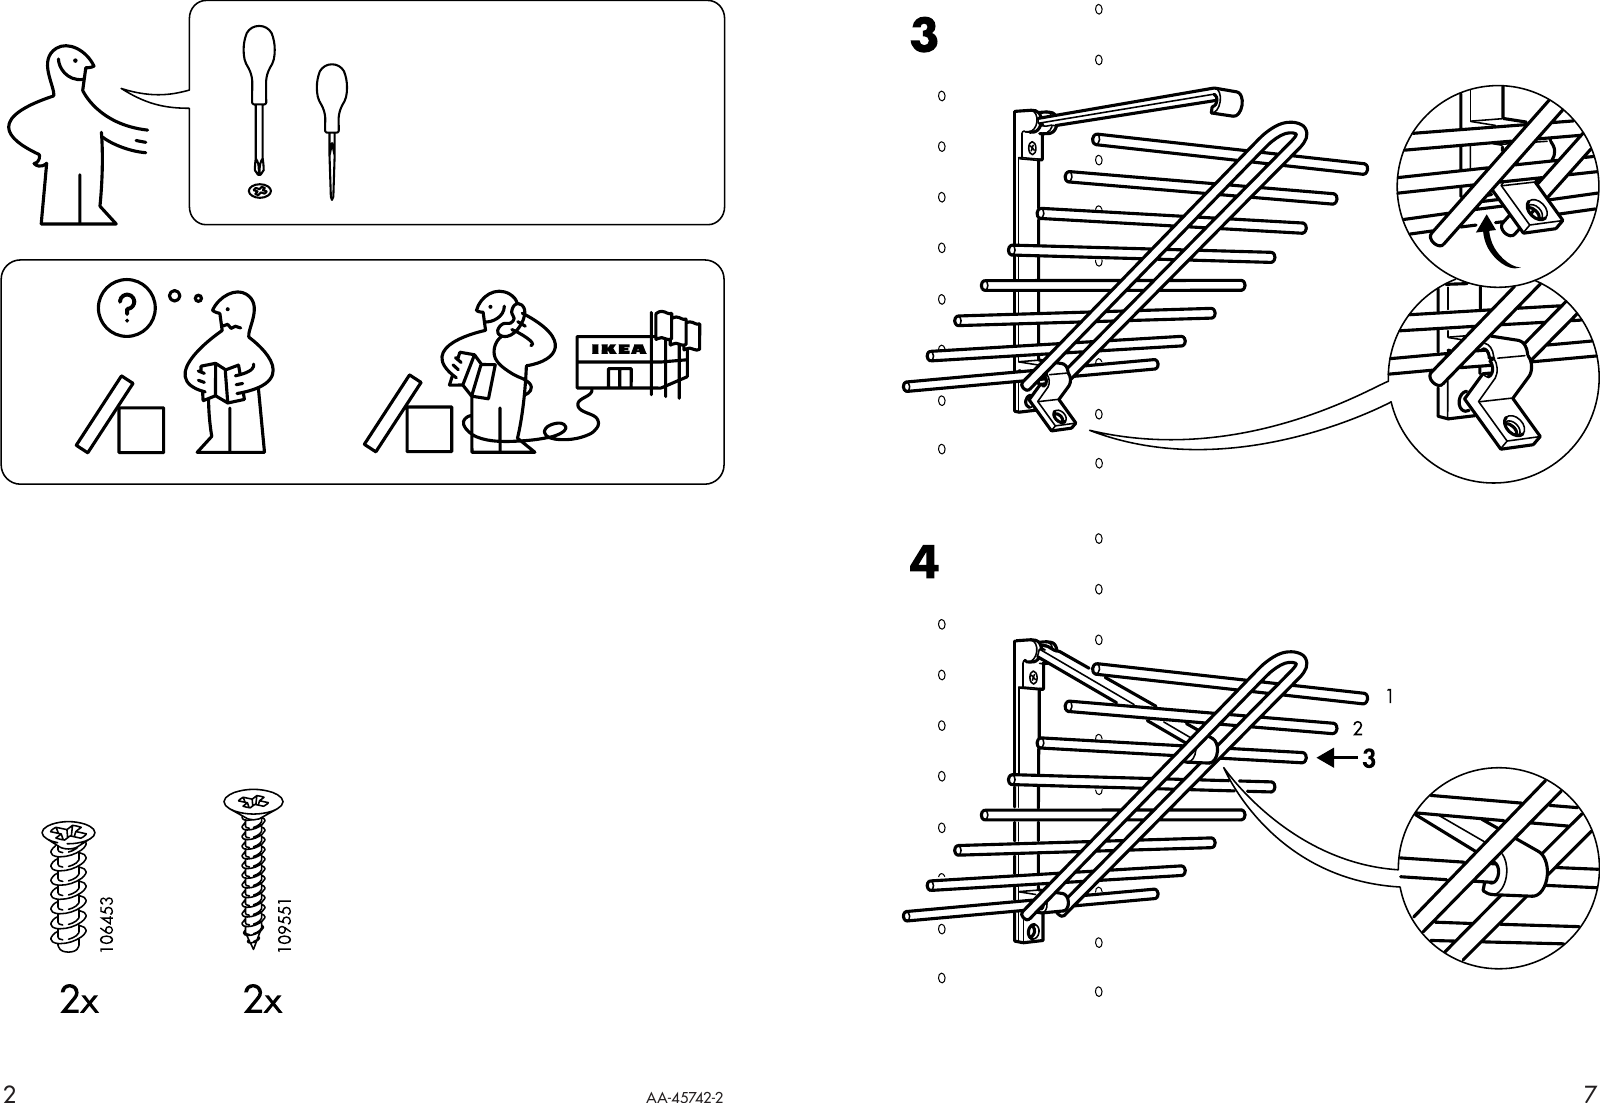 Page 2 of 4 - Ikea Ikea-Komplement-Tie-Rack-Assembly-Instruction-7  Ikea-komplement-tie-rack-assembly-instruction